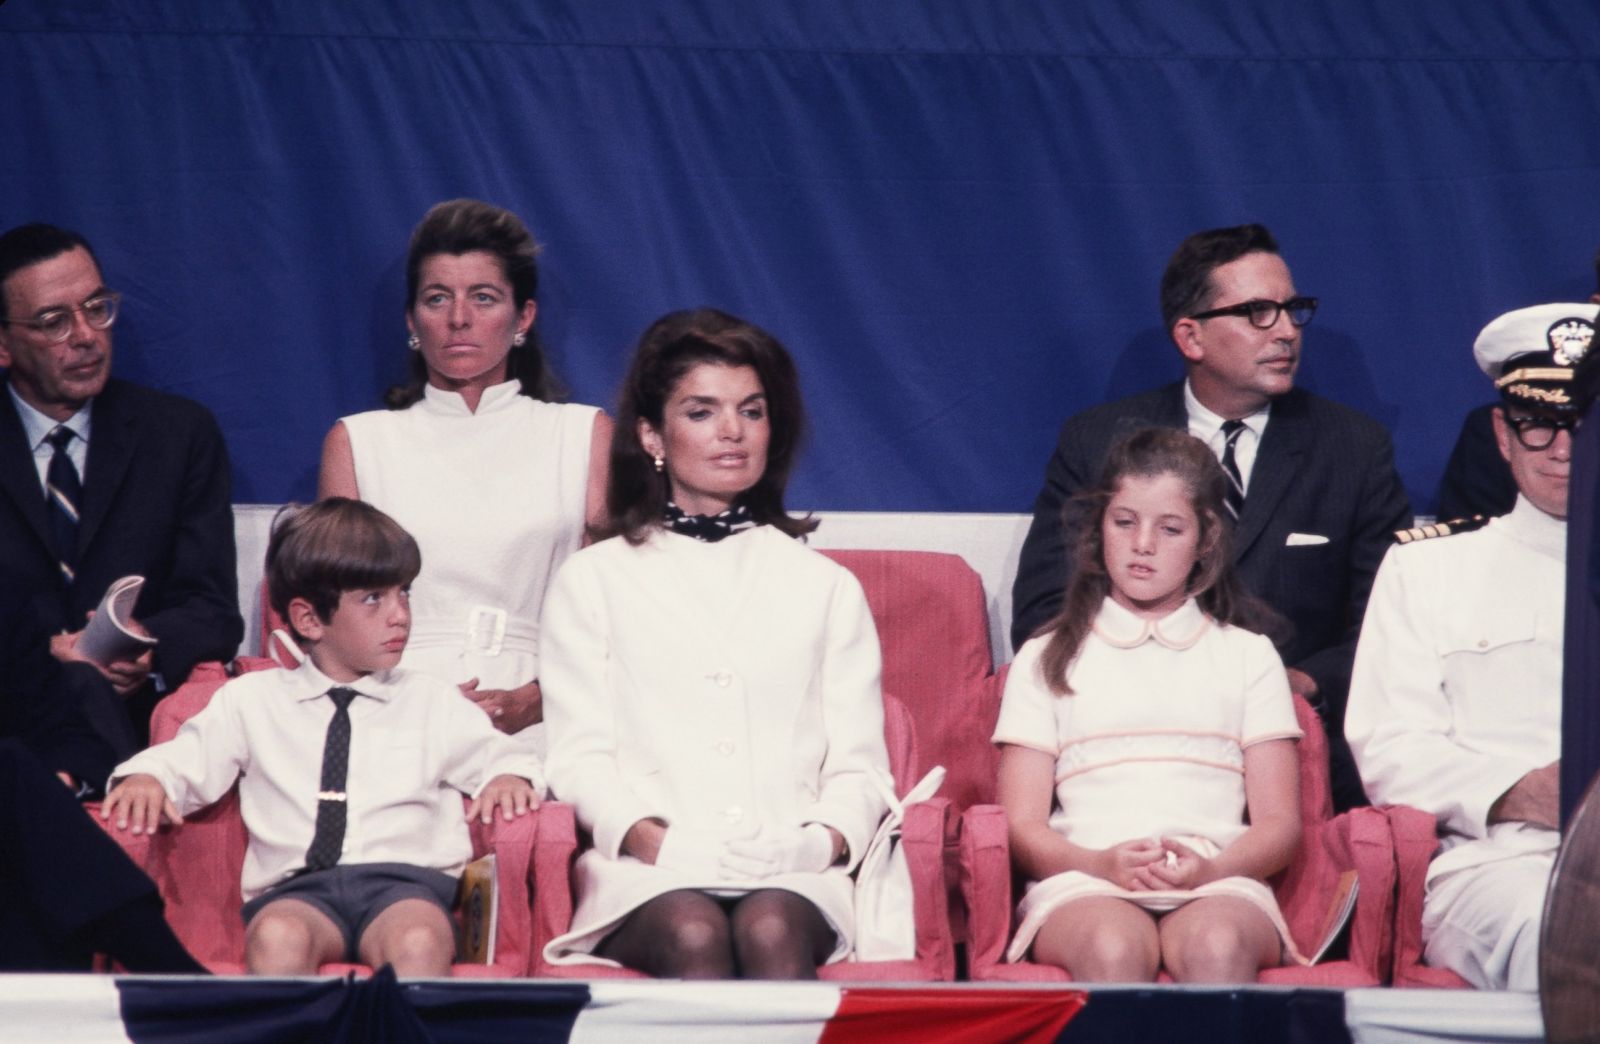 Jacqueline Kennedy Onassis Still America's Most Elegant First Lady Photos | Image #27 ...1600 x 1044